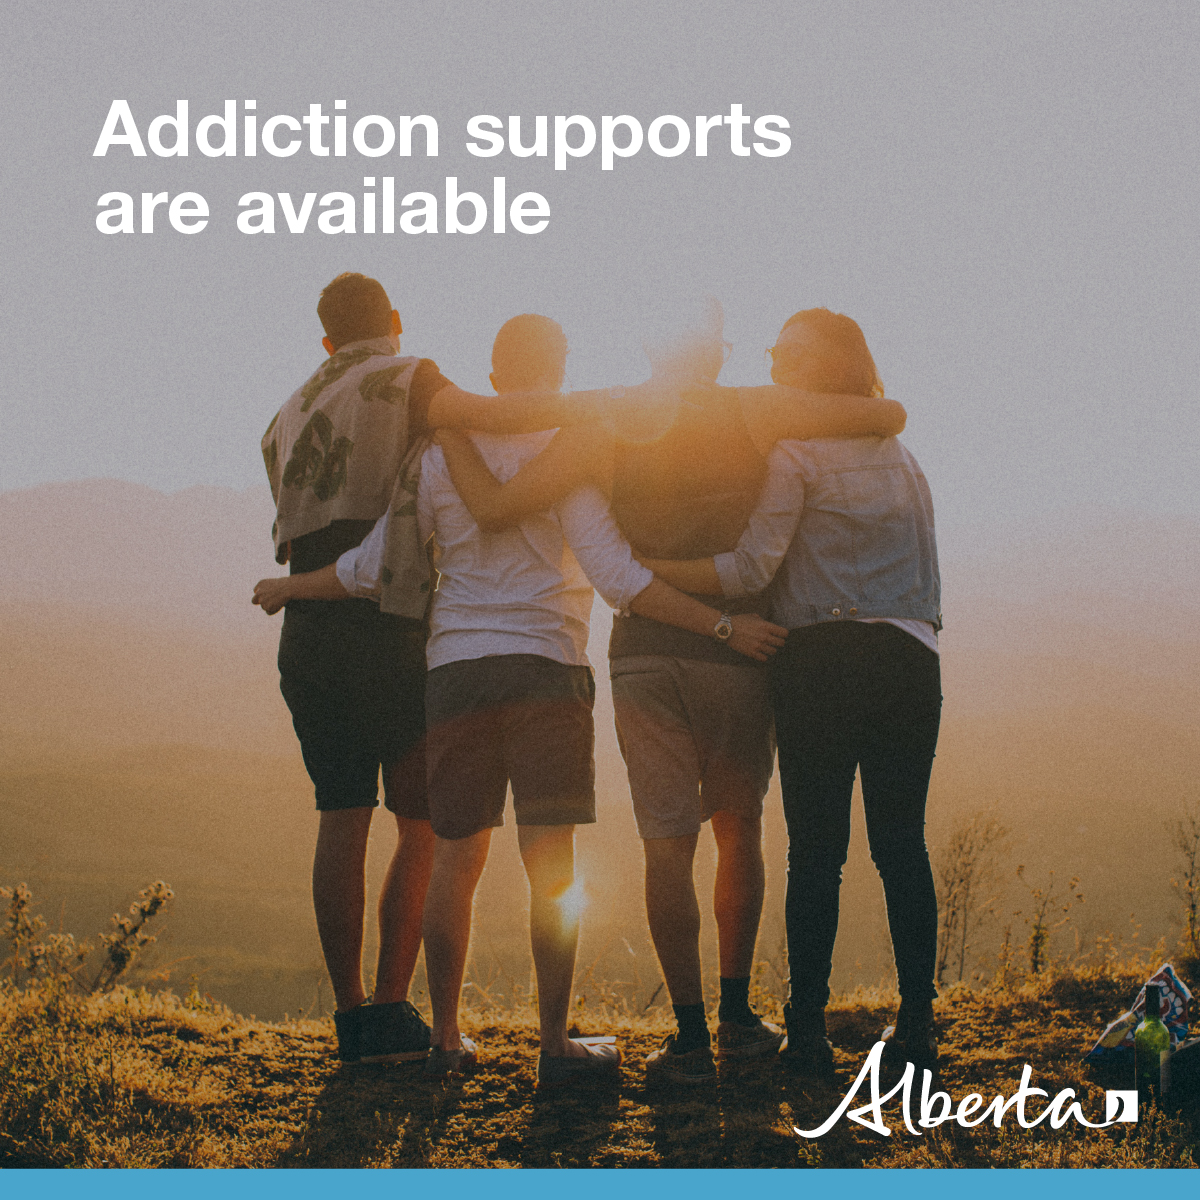 If you or someone you know is struggling with addiction, supports are available: 📞 Call the Addiction Helpline at 1-866-332-2322 (24/7) 💻 Find treatment programs at recoveryaccessalberta.ca ➡️ Get connected with more resources by calling 211 or visit ab.211.ca